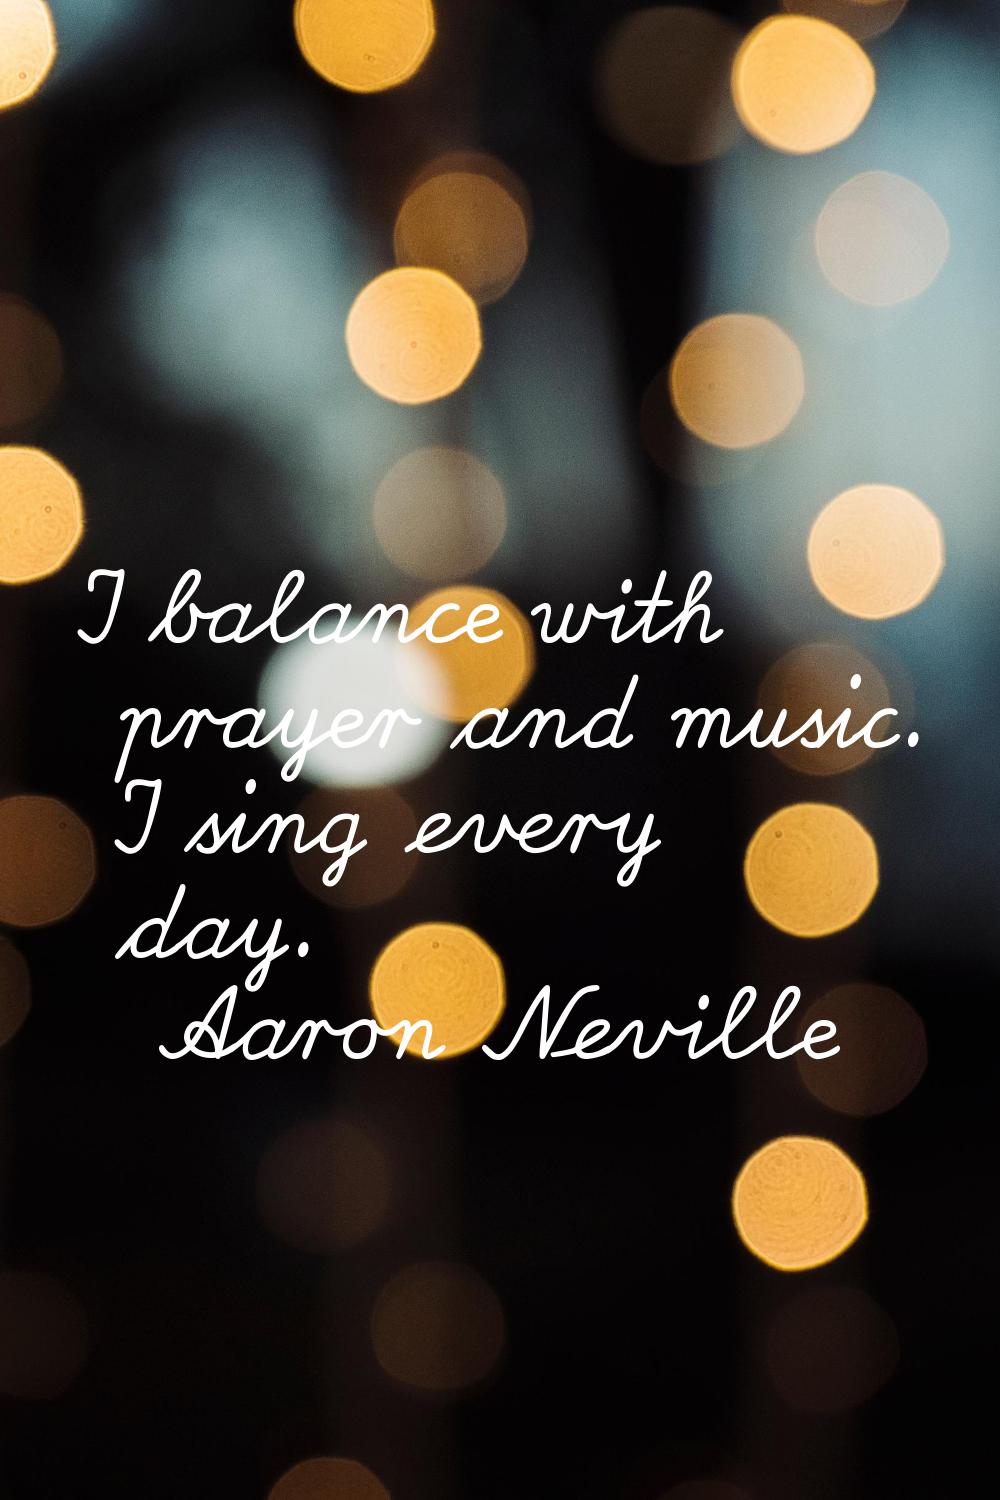 I balance with prayer and music. I sing every day.